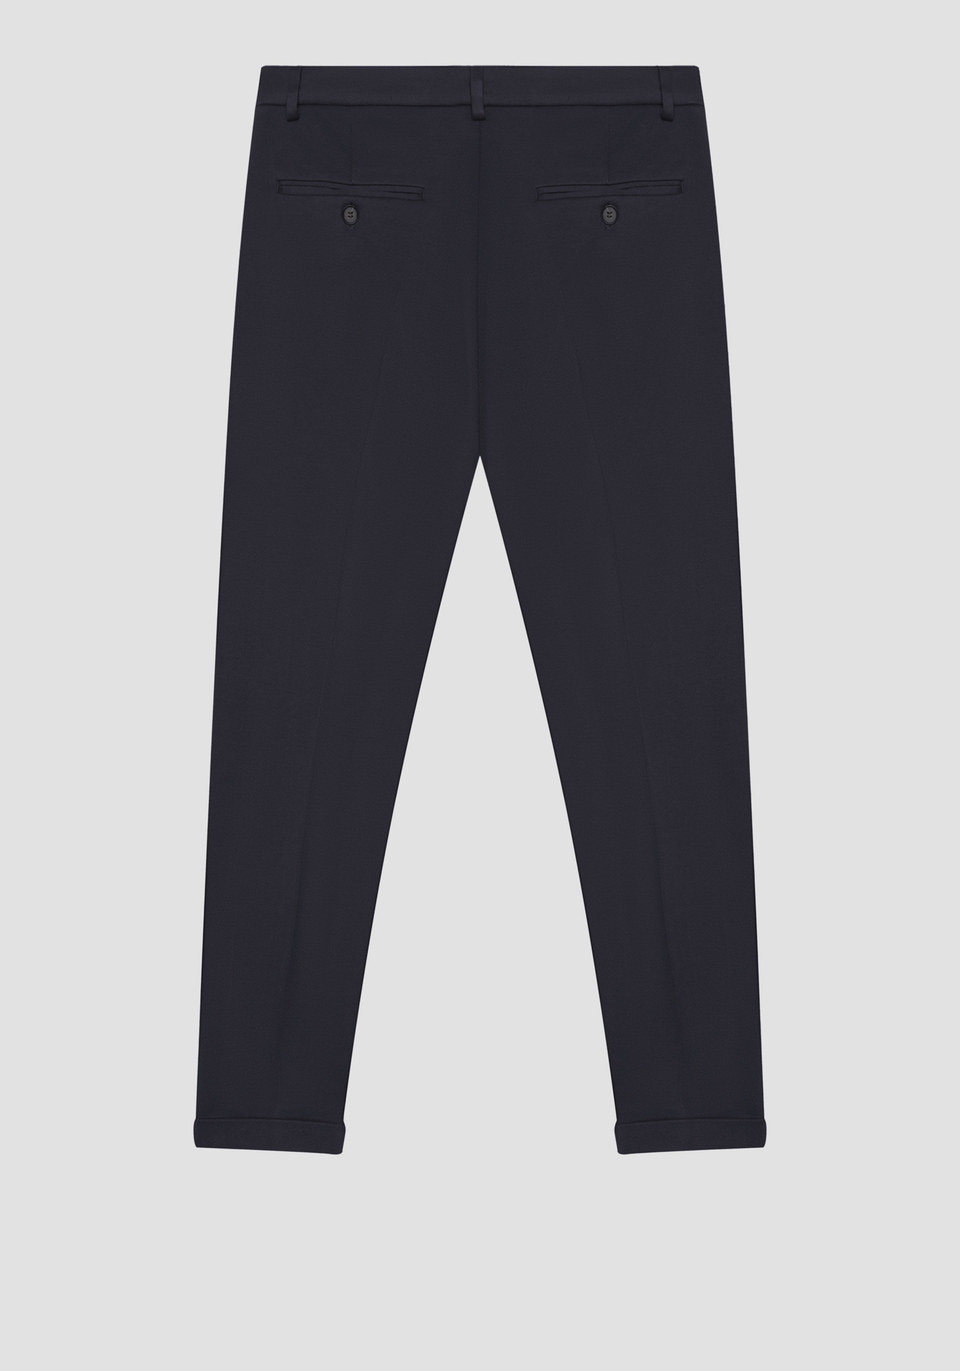 Twisted Tailor Super Skinny Suit Trouser In Charcoal Donegal Tweed, $47 |  Asos | Lookastic